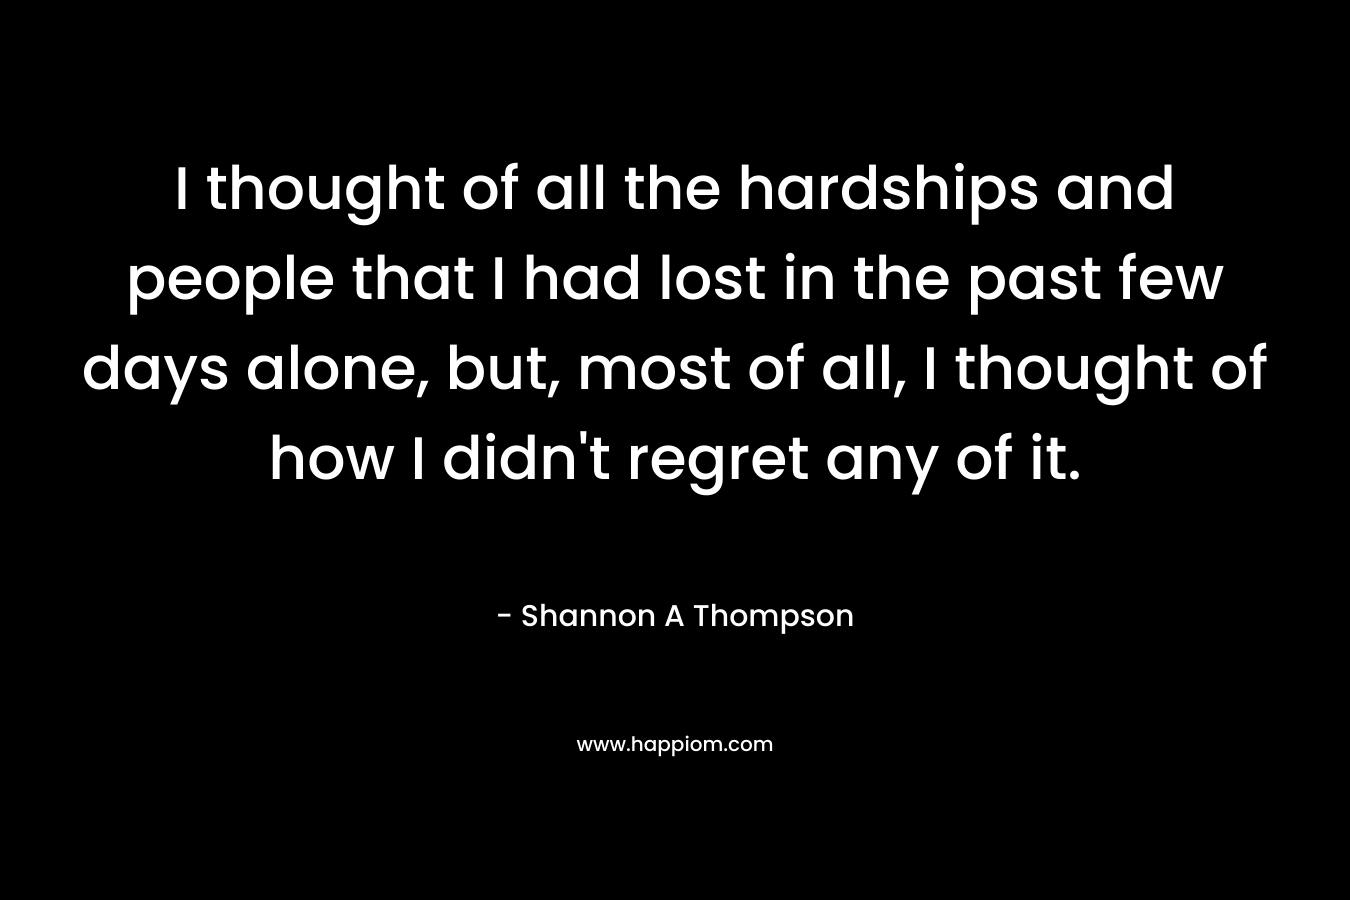 I thought of all the hardships and people that I had lost in the past few days alone, but, most of all, I thought of how I didn’t regret any of it. – Shannon A Thompson